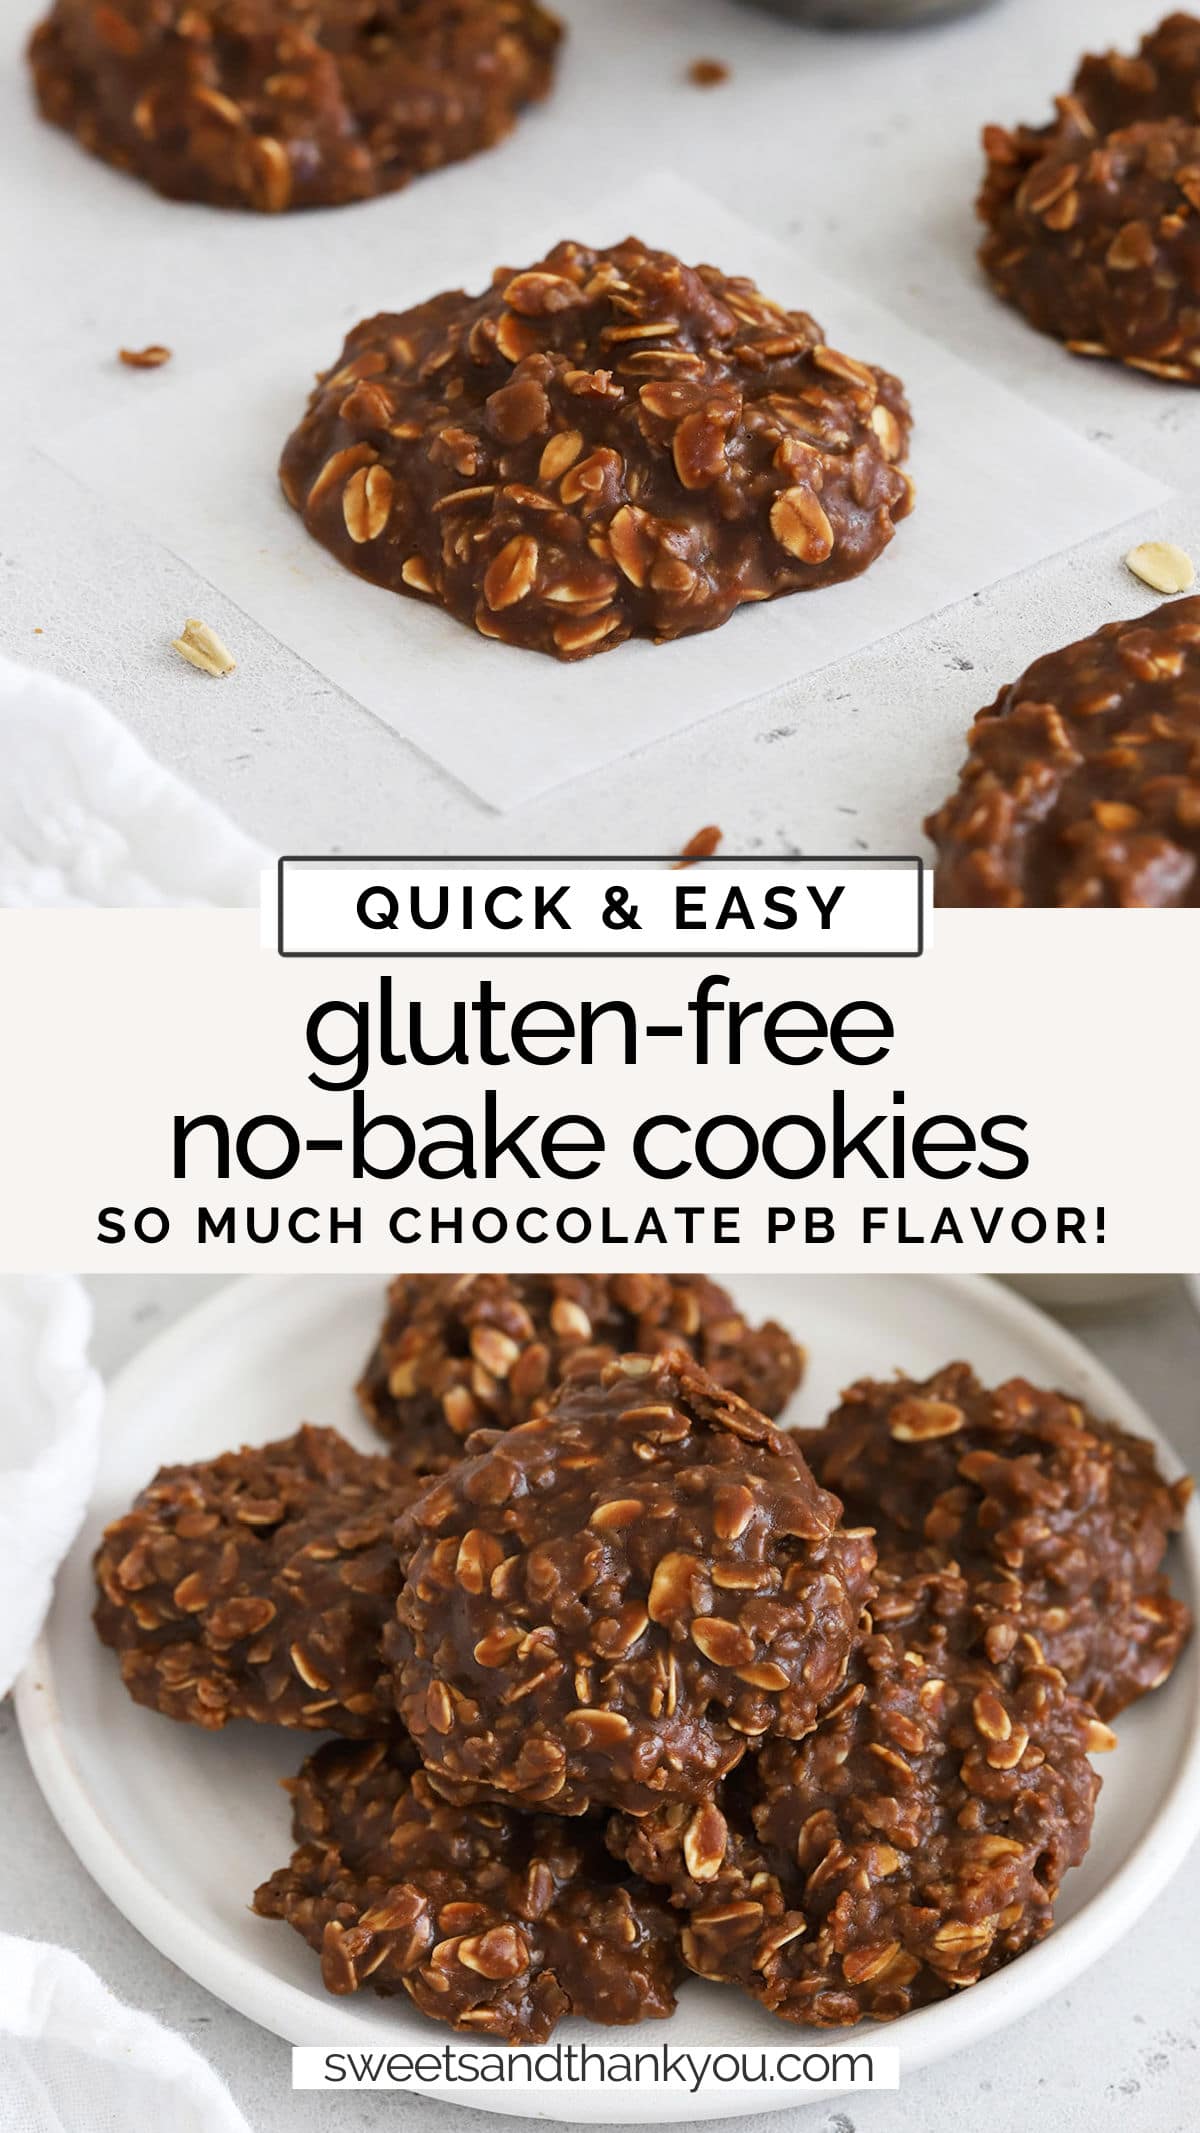 Gluten-Free No-Bake Cookies - These gluten-free chocolate peanut butter no-bake cookies have all the flavor you love, simply made gluten-free! // Gluten Free No Bakes // Gluten Free No bake Cookie recipe // gluten free no bake dessert // easy gluten-free desserts // easy gluten-free cookies // flourless gluten free cookies // gluten free cookies without eggs // gluten free cookie recipes // chocolate peanut butter no bake cookie recipe // gluten-free chocolate peanut butter cookies